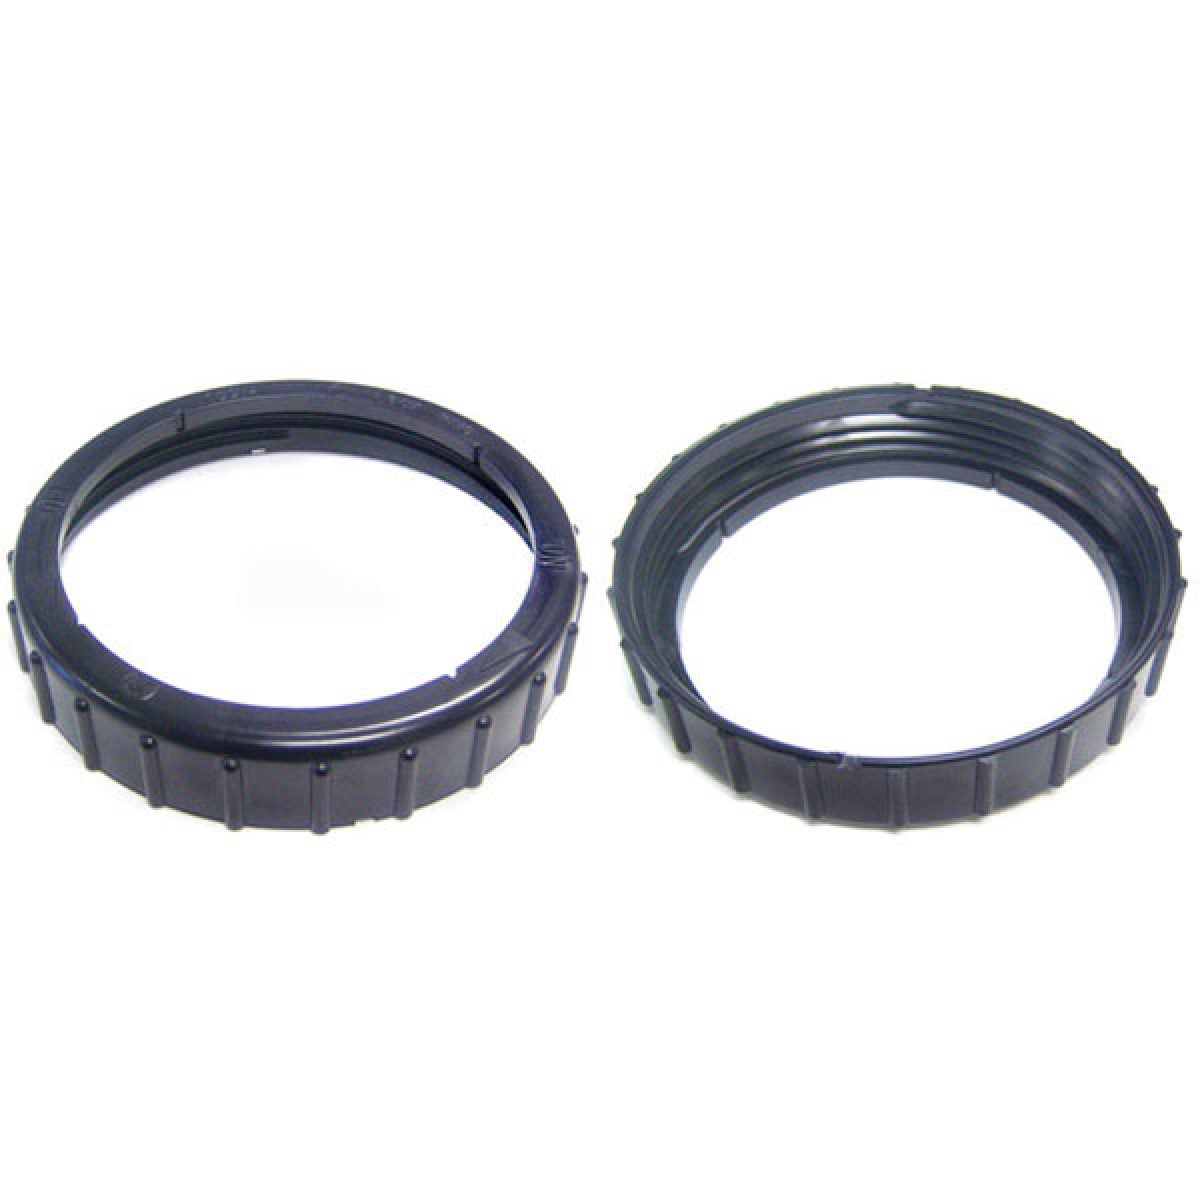 Feeder and Leaf Traps Pentair R172214 Lock Ring Replacement Pool/Spa Filter